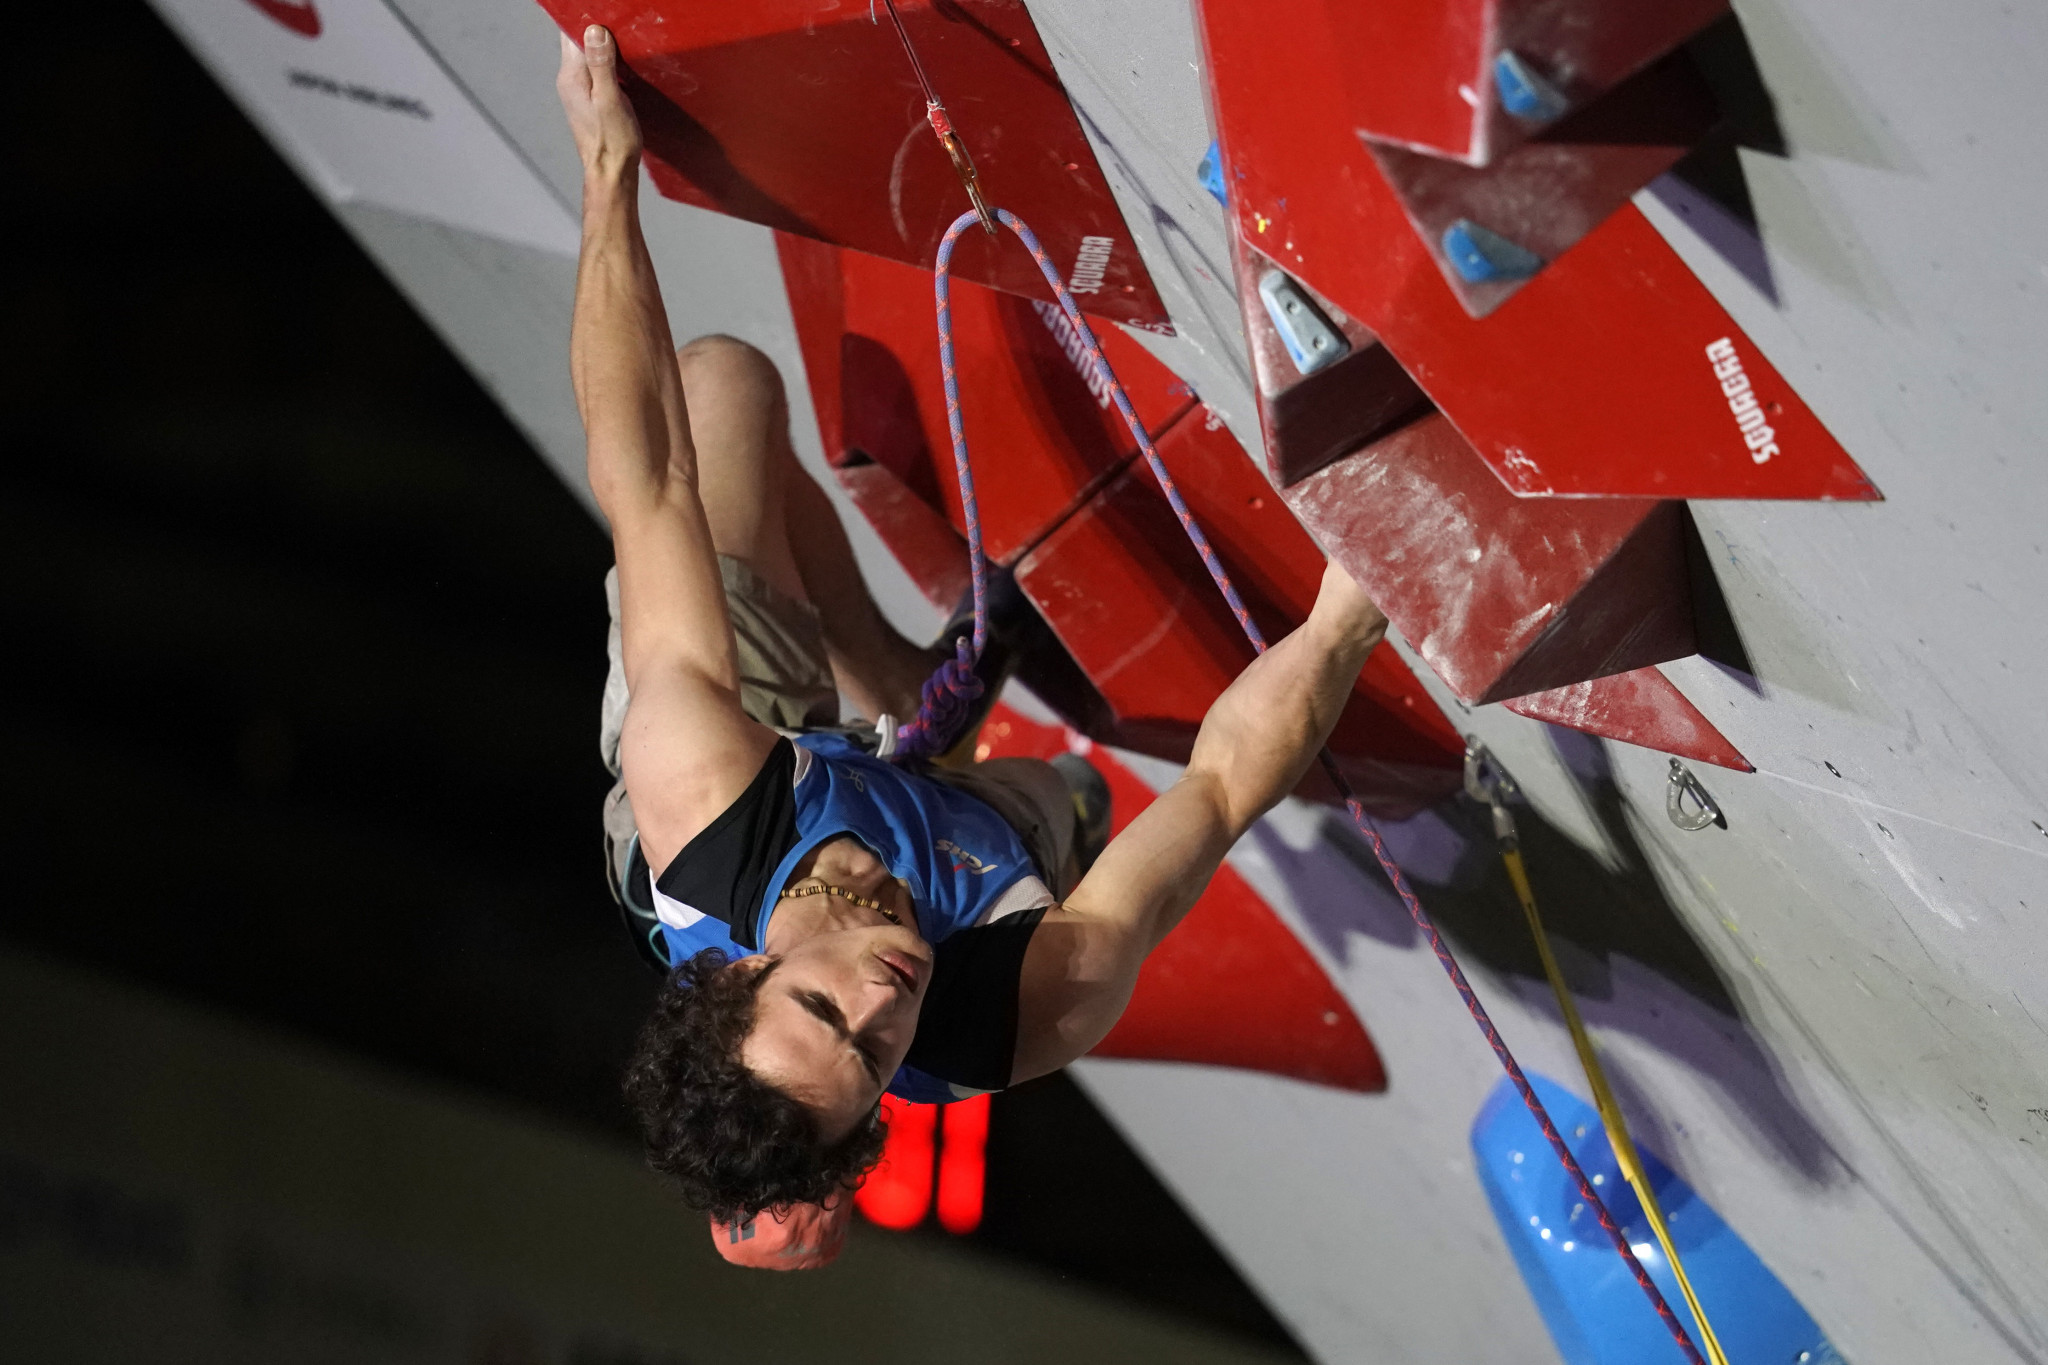 The Czech Republic's Adam Ondra secured the men's honours in the lead competition at the IFSC European Championships in Edinburgh ©Getty Images